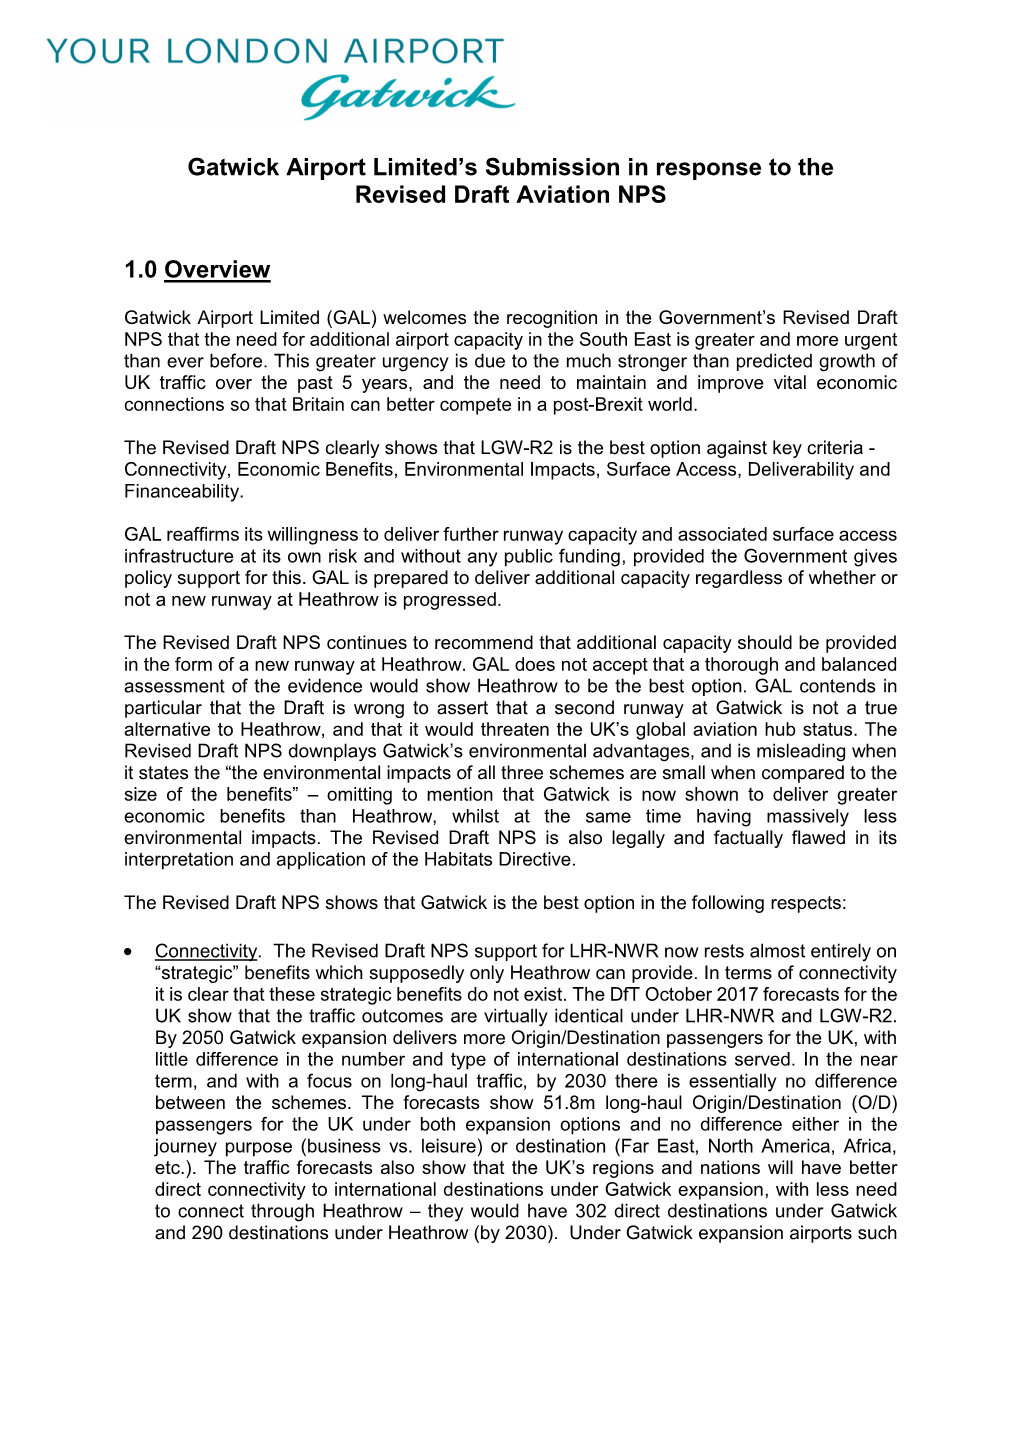 Gatwick Airport Limited's Submission in Response to the Revised Draft Aviation NPS 1.0 Overview